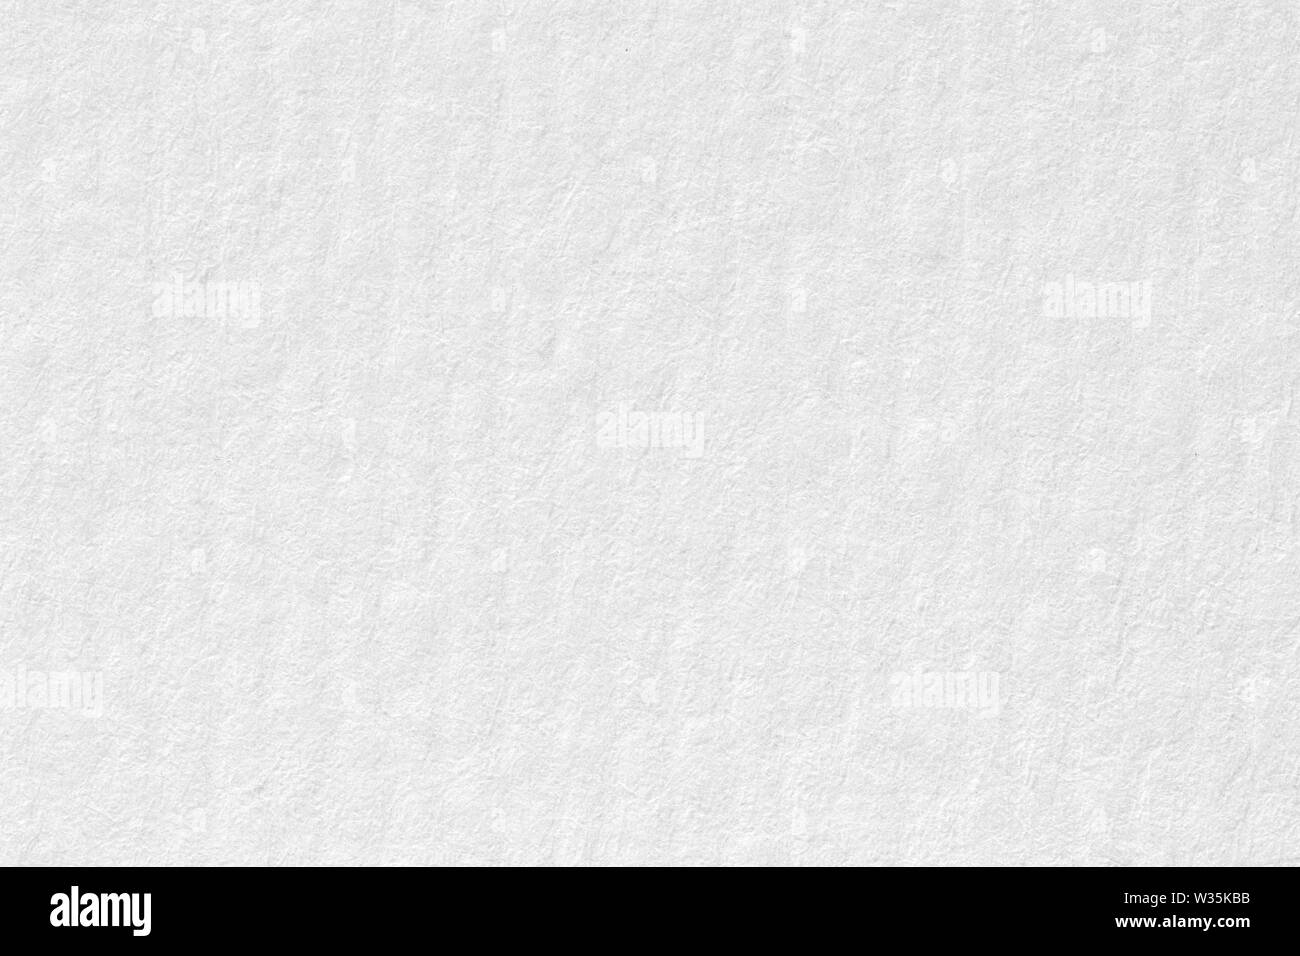 White paper background with stripes. High quality texture in extremely high resolution. Stock Photo